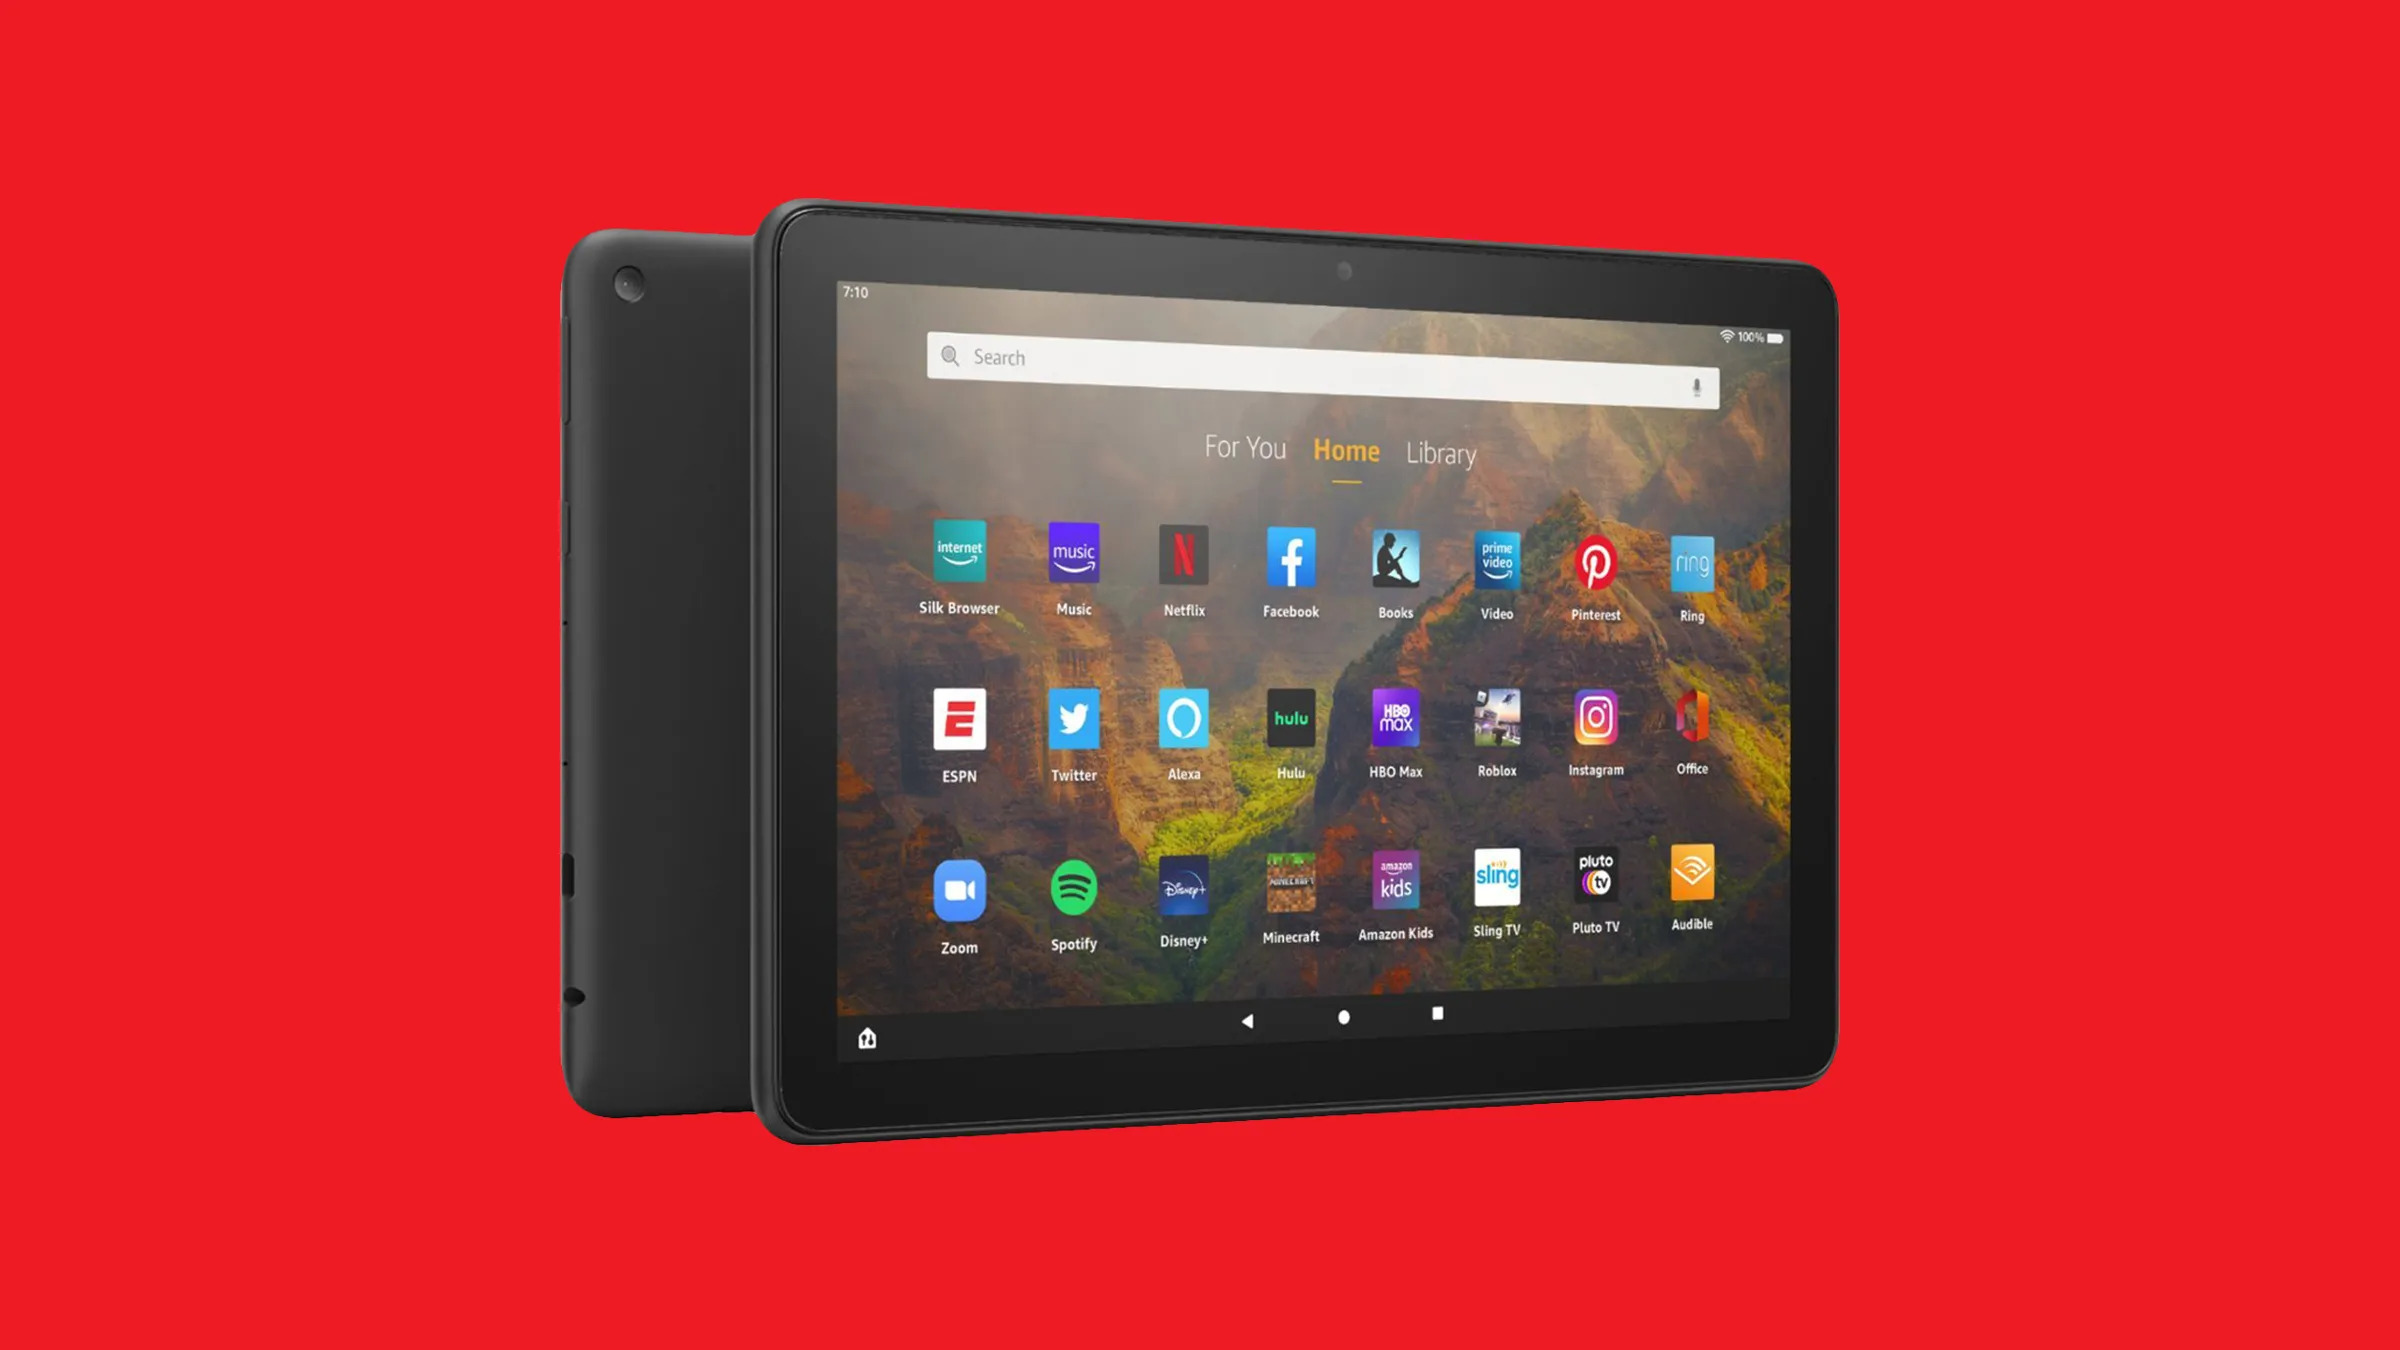 How To Use Warranty On Amazon Fire Tablet